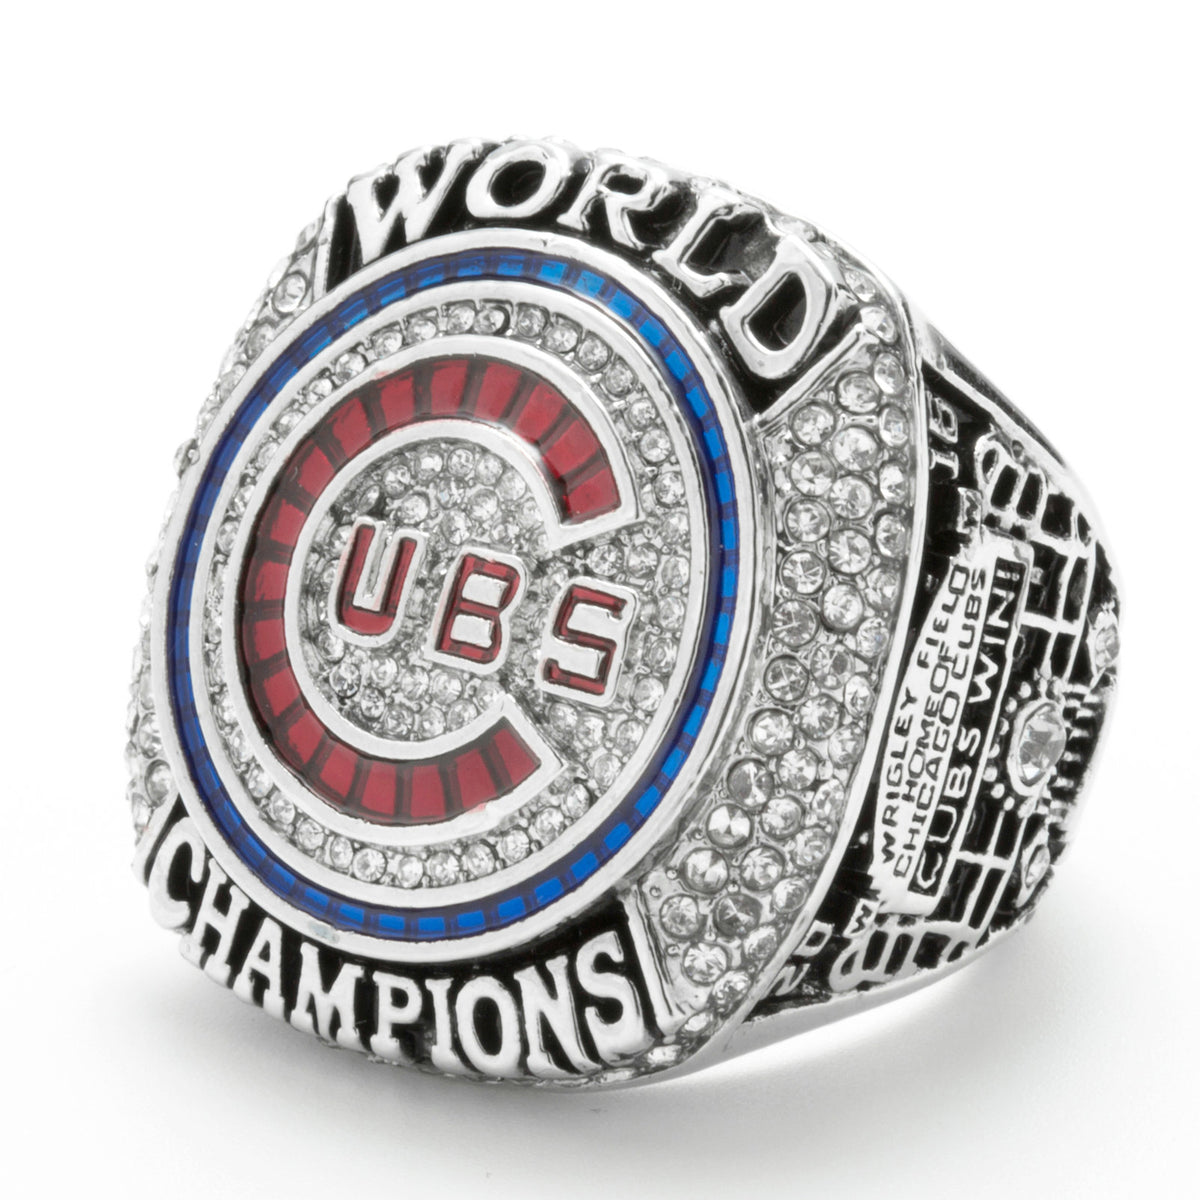 Photos: Cubs receive World Series rings at Wrigley Field - The